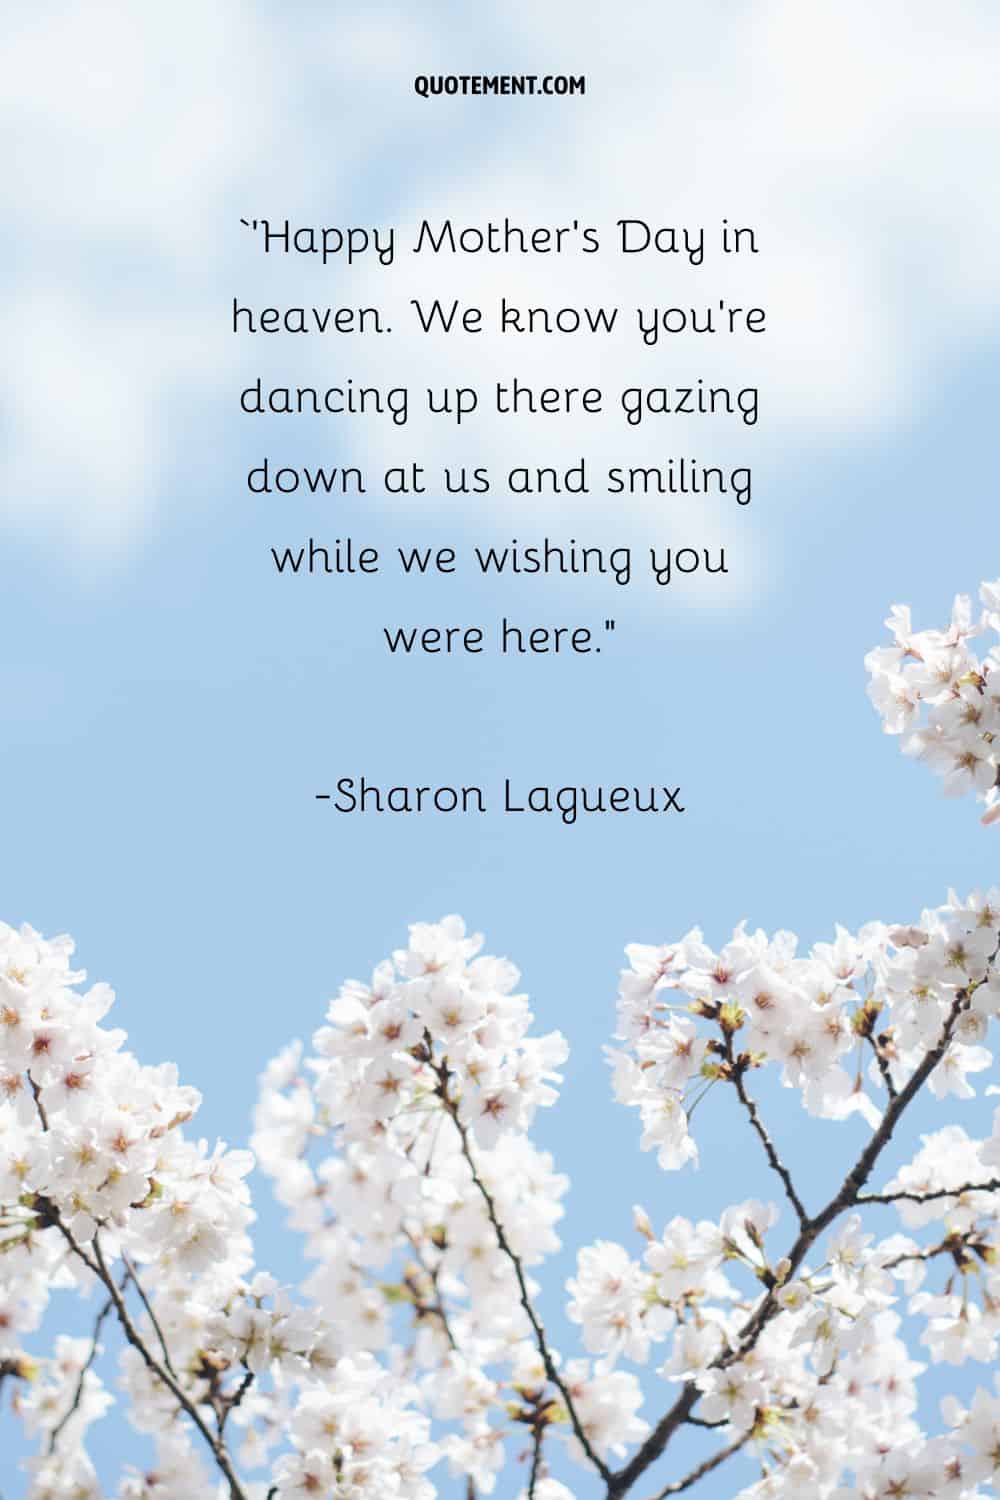 white blossoms under a blue sky representing a beautiful happy mother's day in heaven quote
